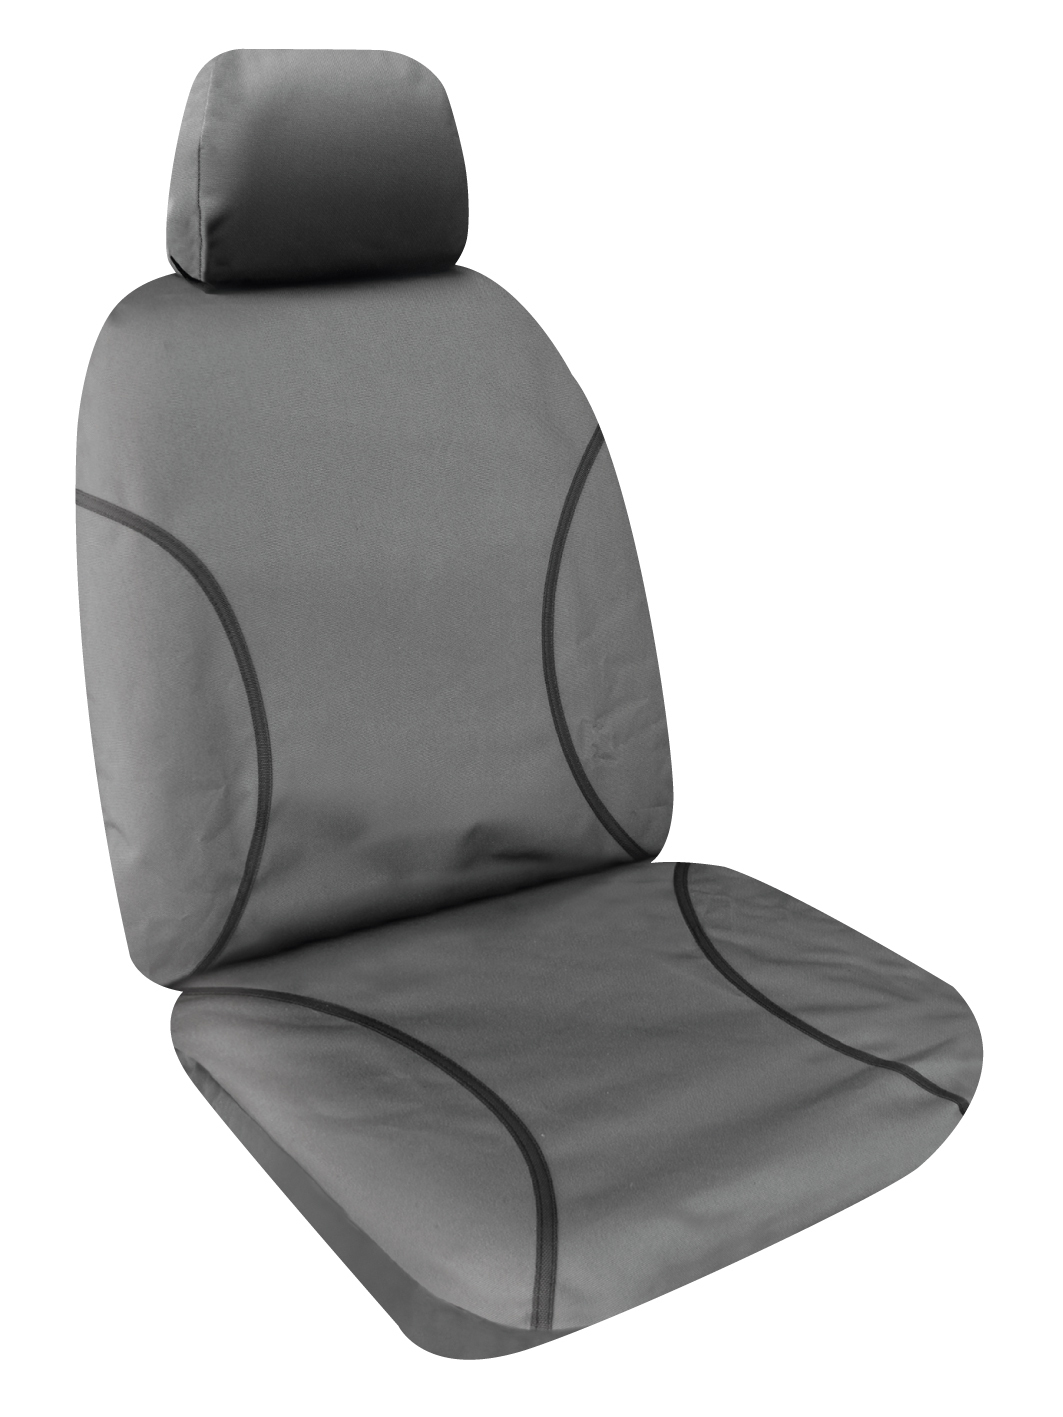 SPERLING FRONT ROW SEAT COVERS TO SUIT TOYOTA LANDCRUISER (200 SERIES) 2009 - CURRENT